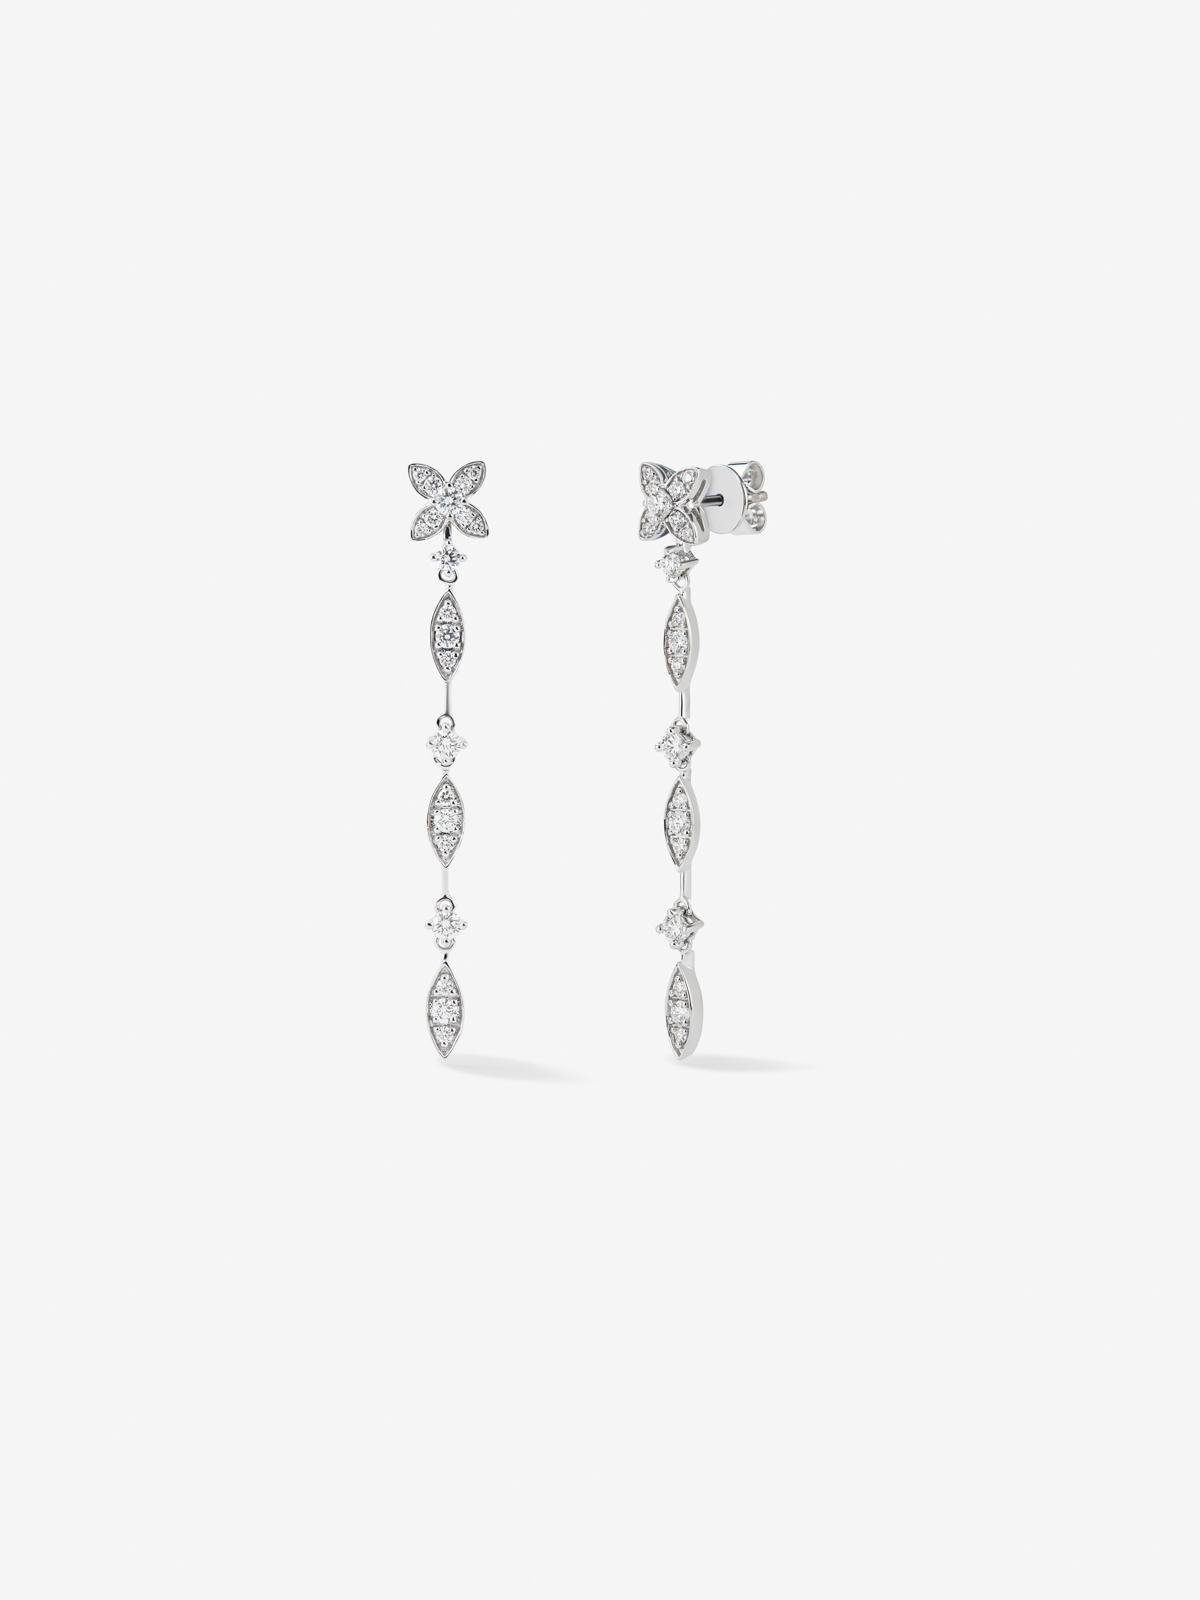 18K White Gold Earrings with Bright Size Diamonds of 0.83 CTS